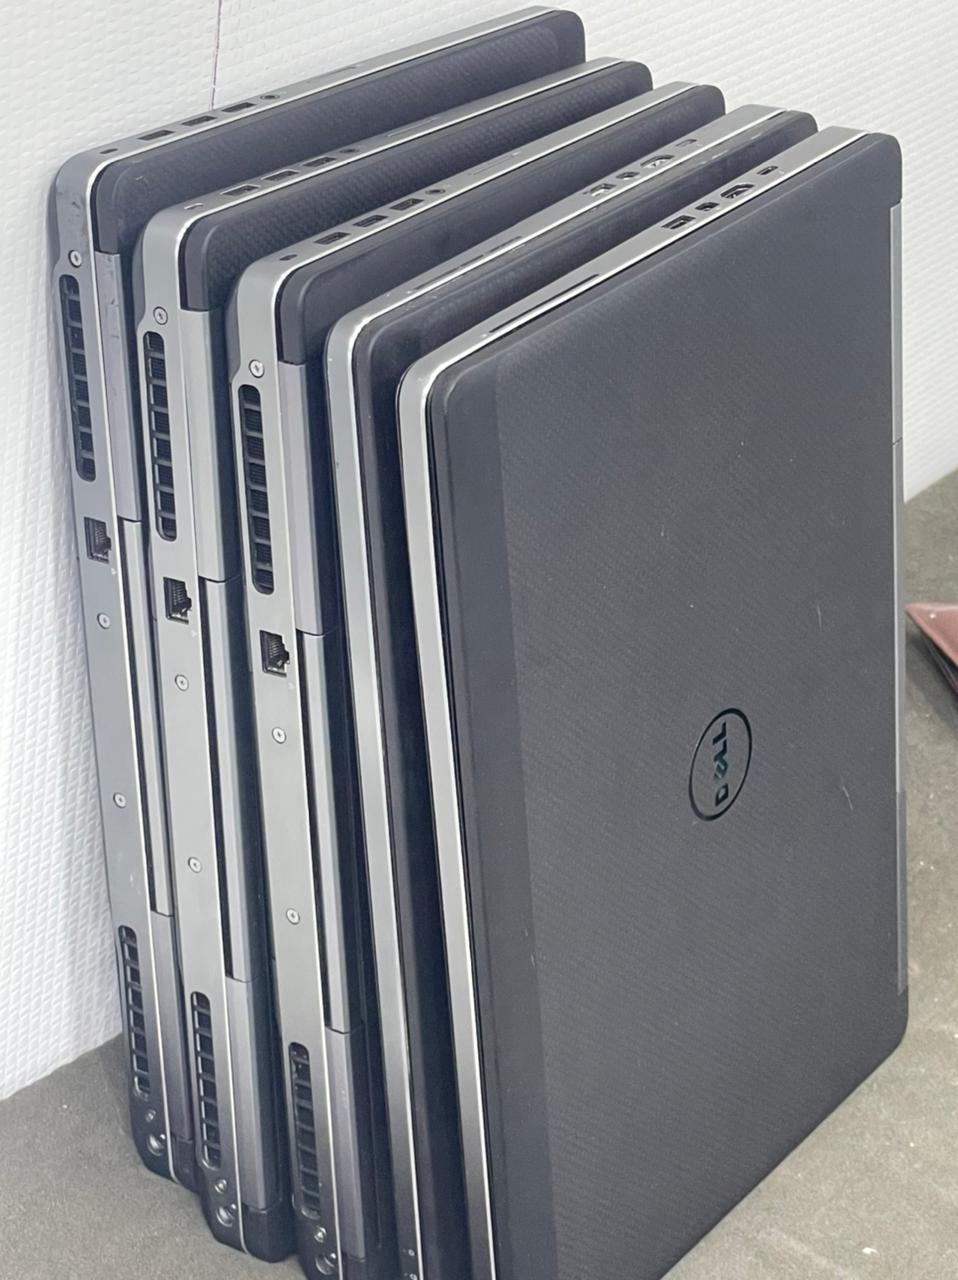 Buy Dell Precision 7510 Laptops, Used Laptop Price in Pakistan